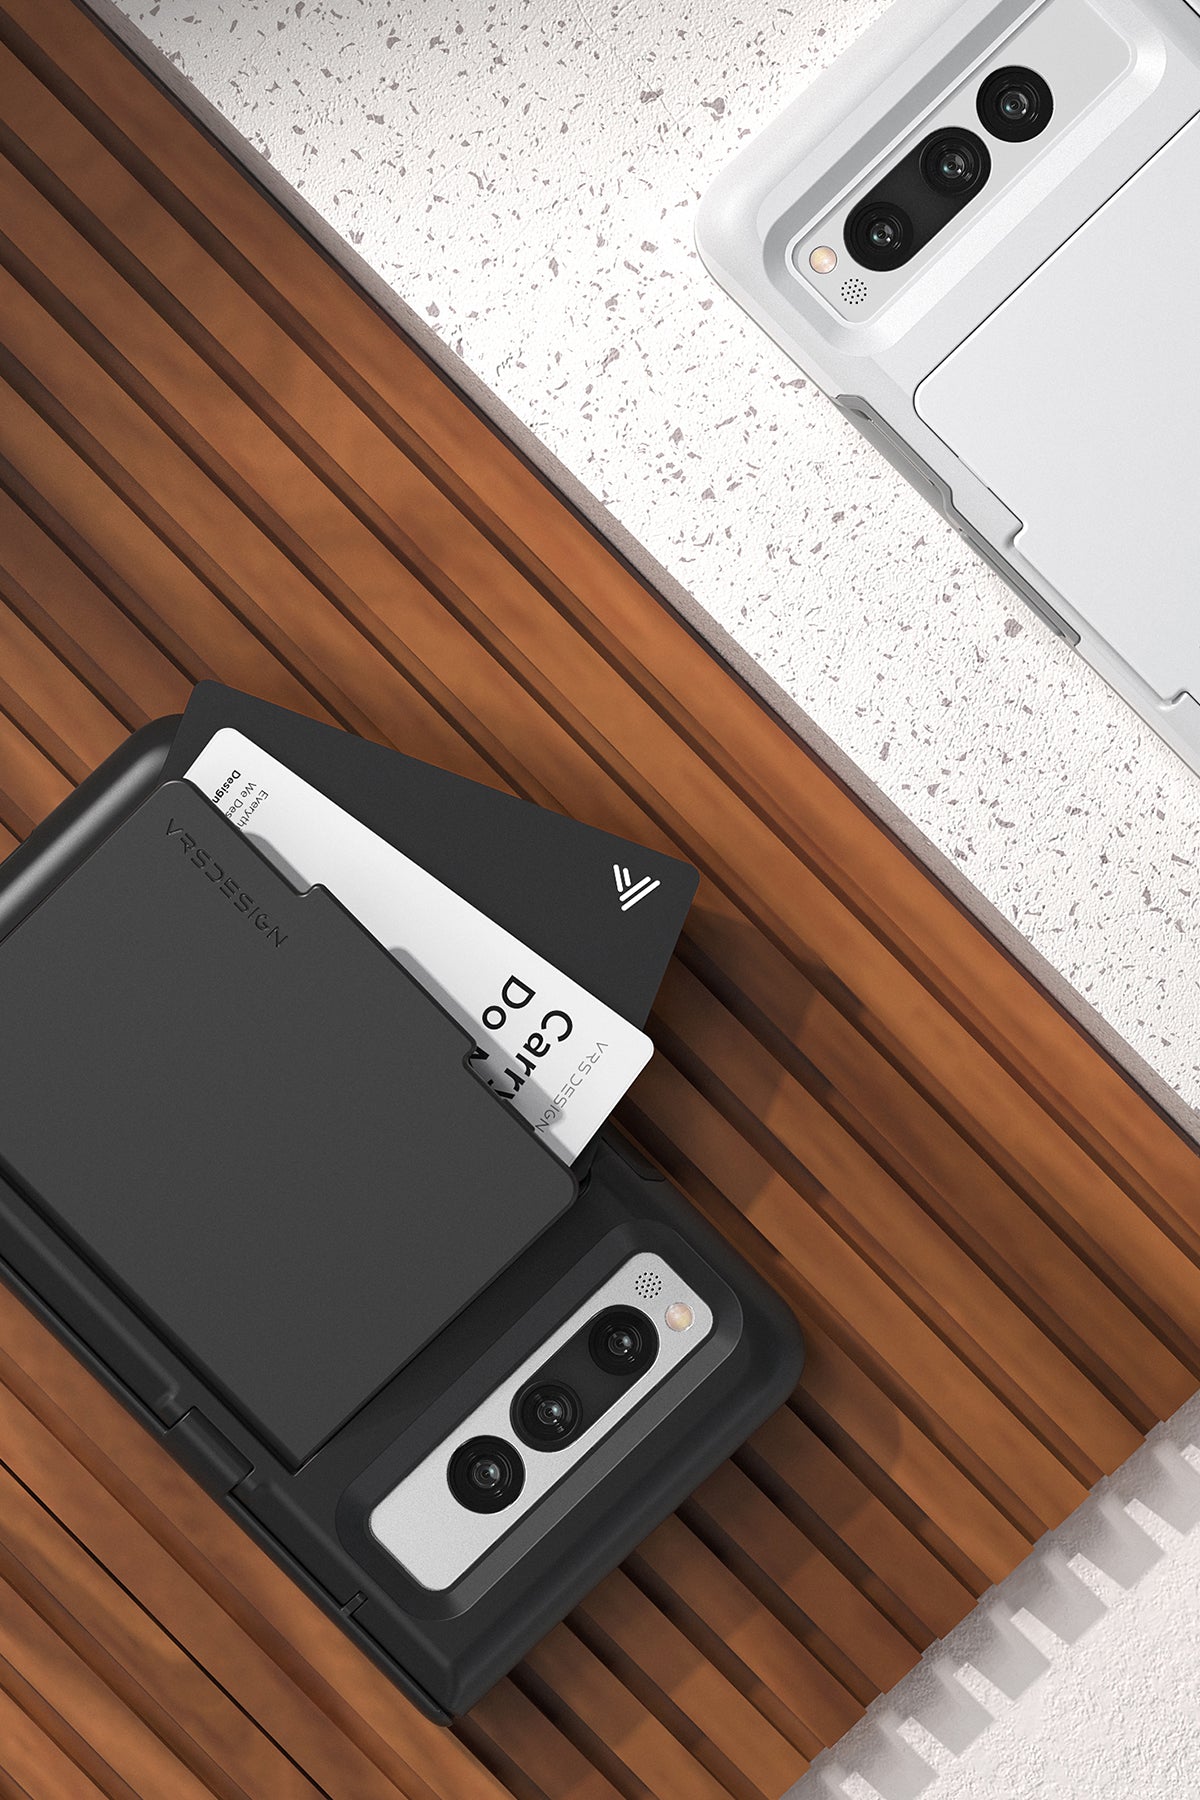 VRS Design-Premium Quality Phone Cases for iPhone, Galaxy and Pixel